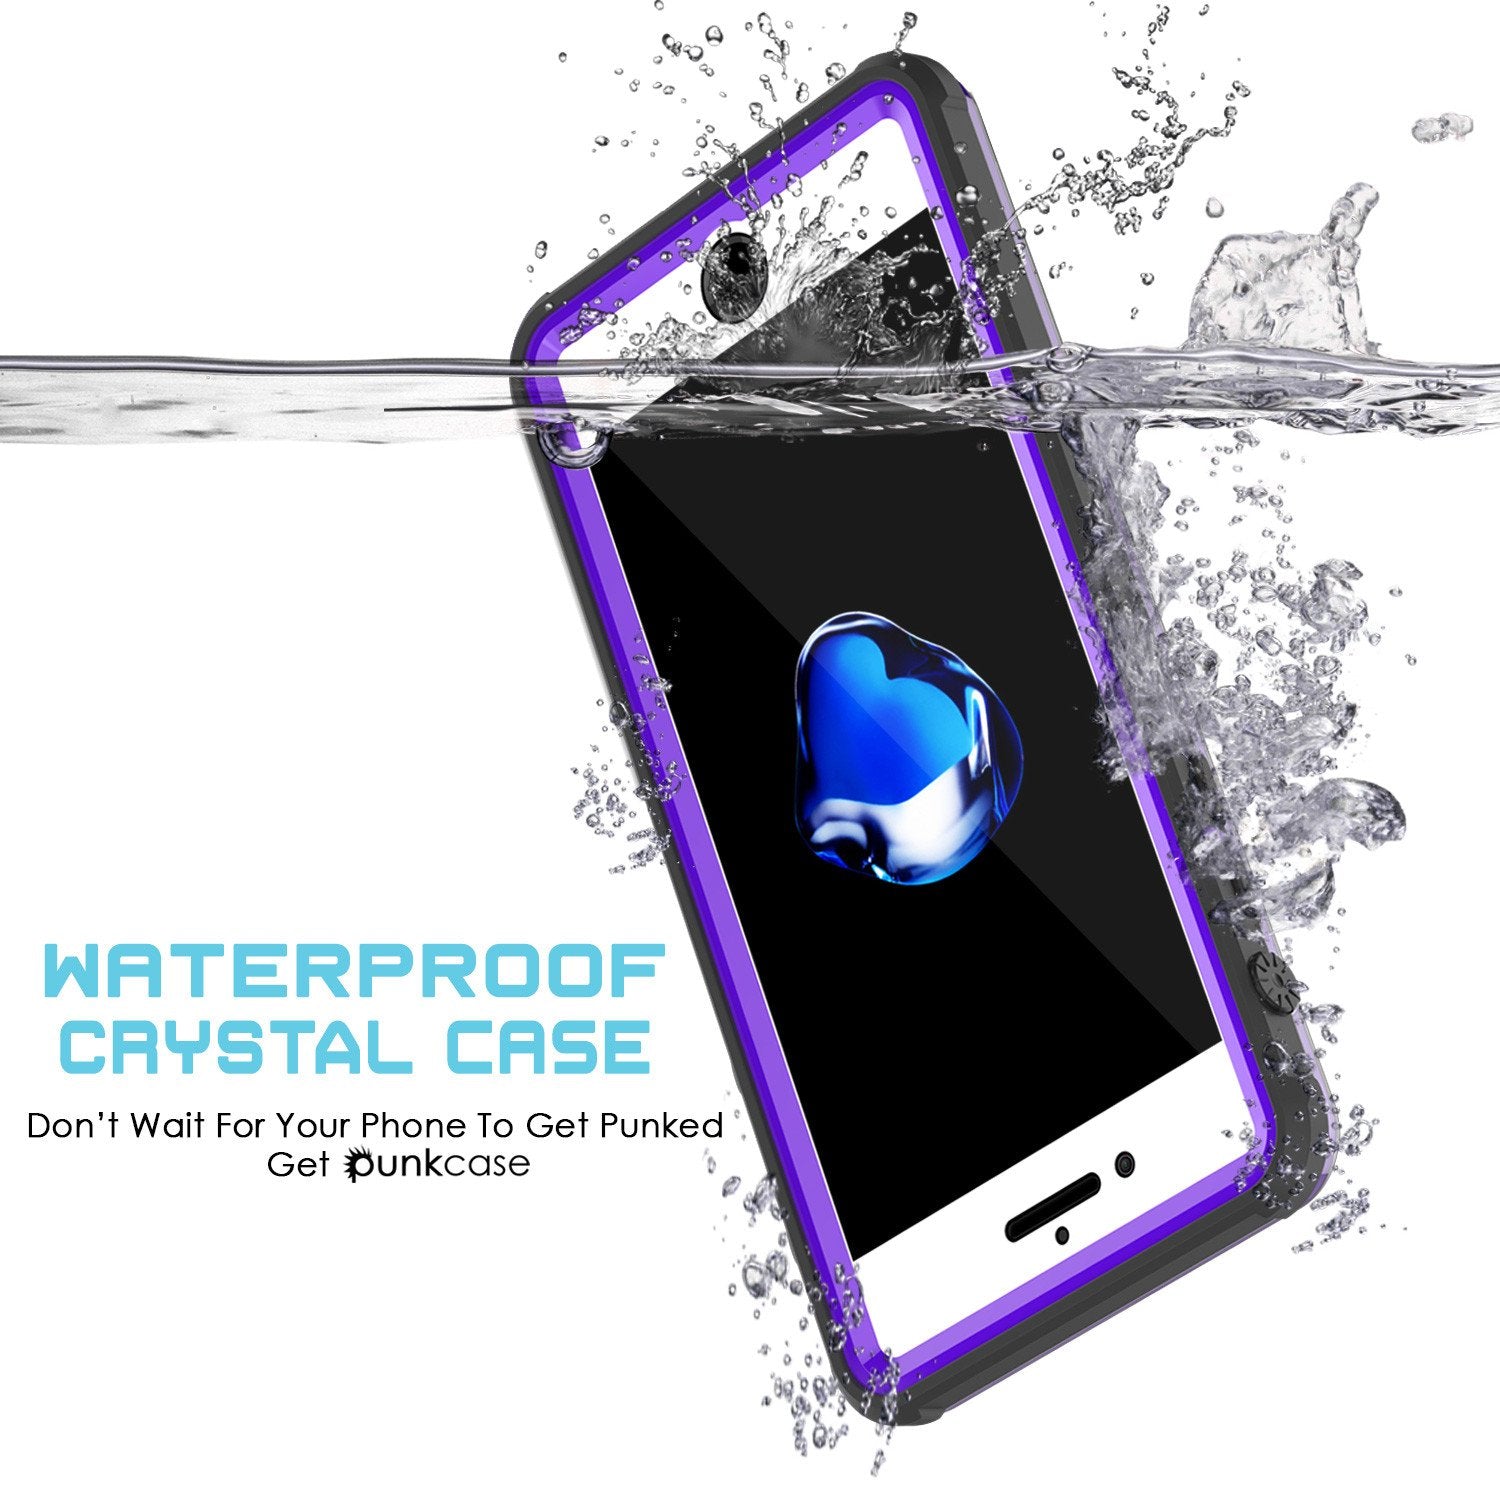 iPhone 7+ Plus Waterproof Case, PUNKcase CRYSTAL Purple W/ Attached Screen Protector  | Warranty